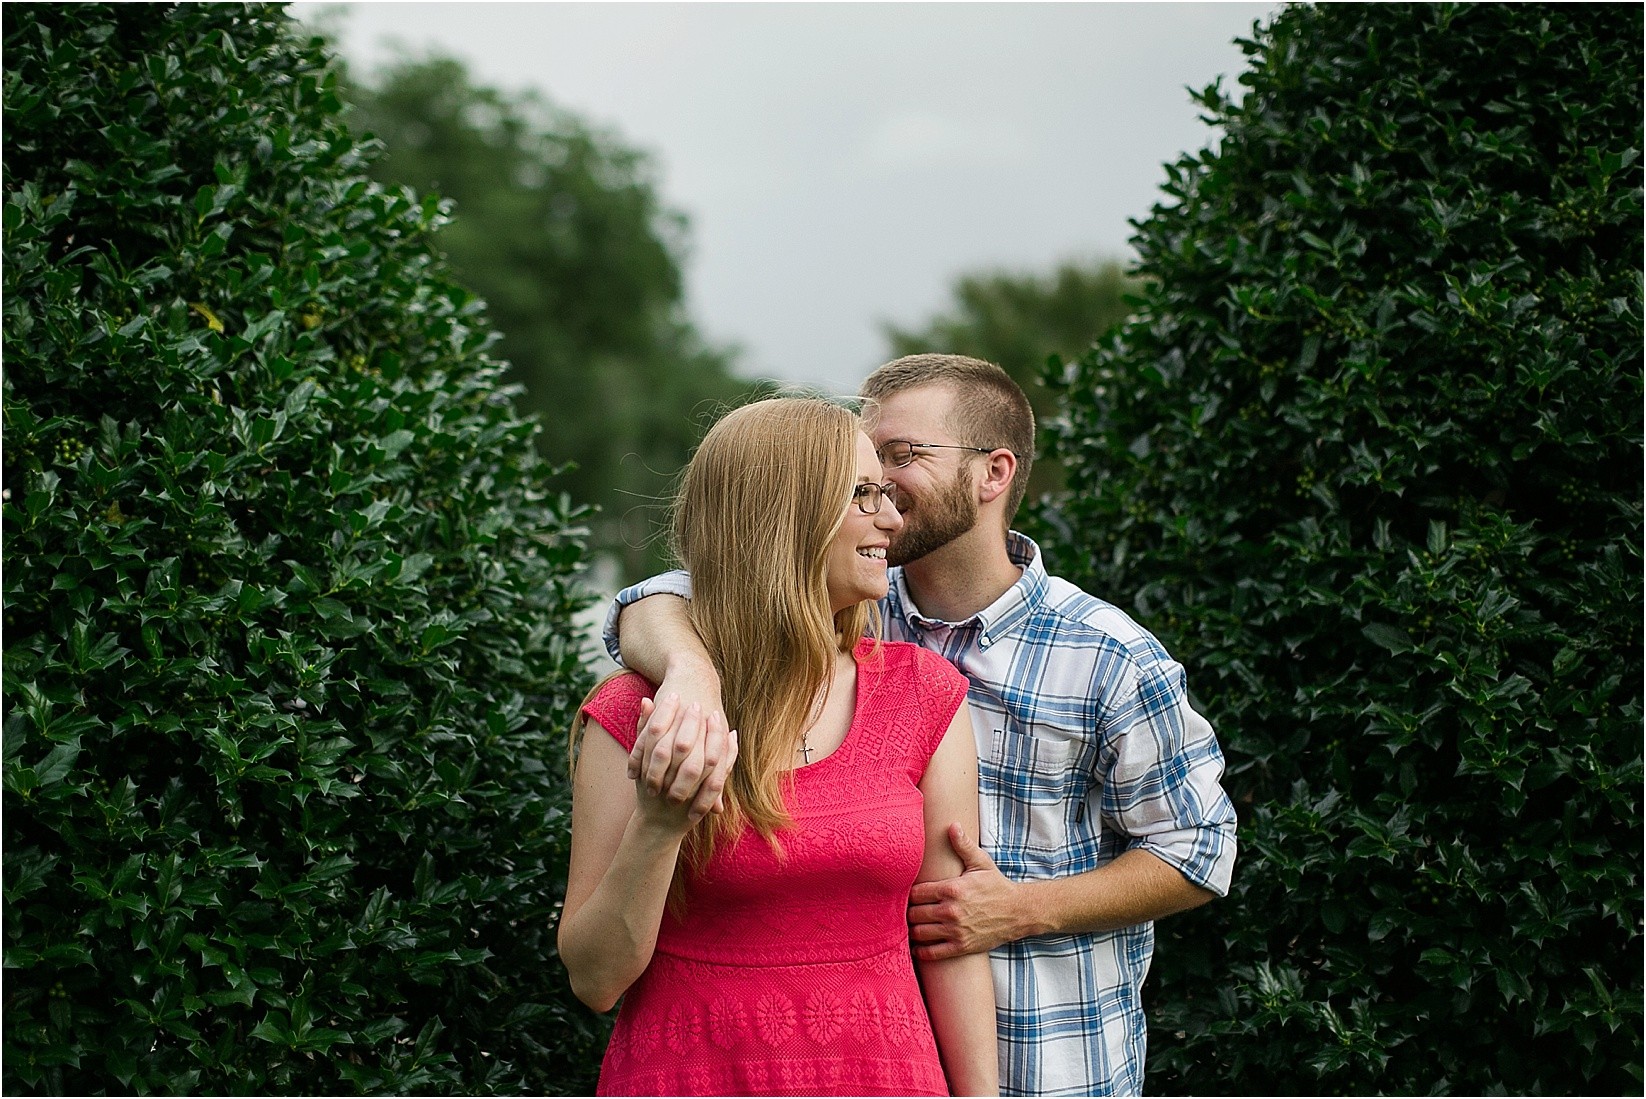 between the bushesduring Andria & Matts Mount Pleasant engagement session in downtown mount pleasant nc